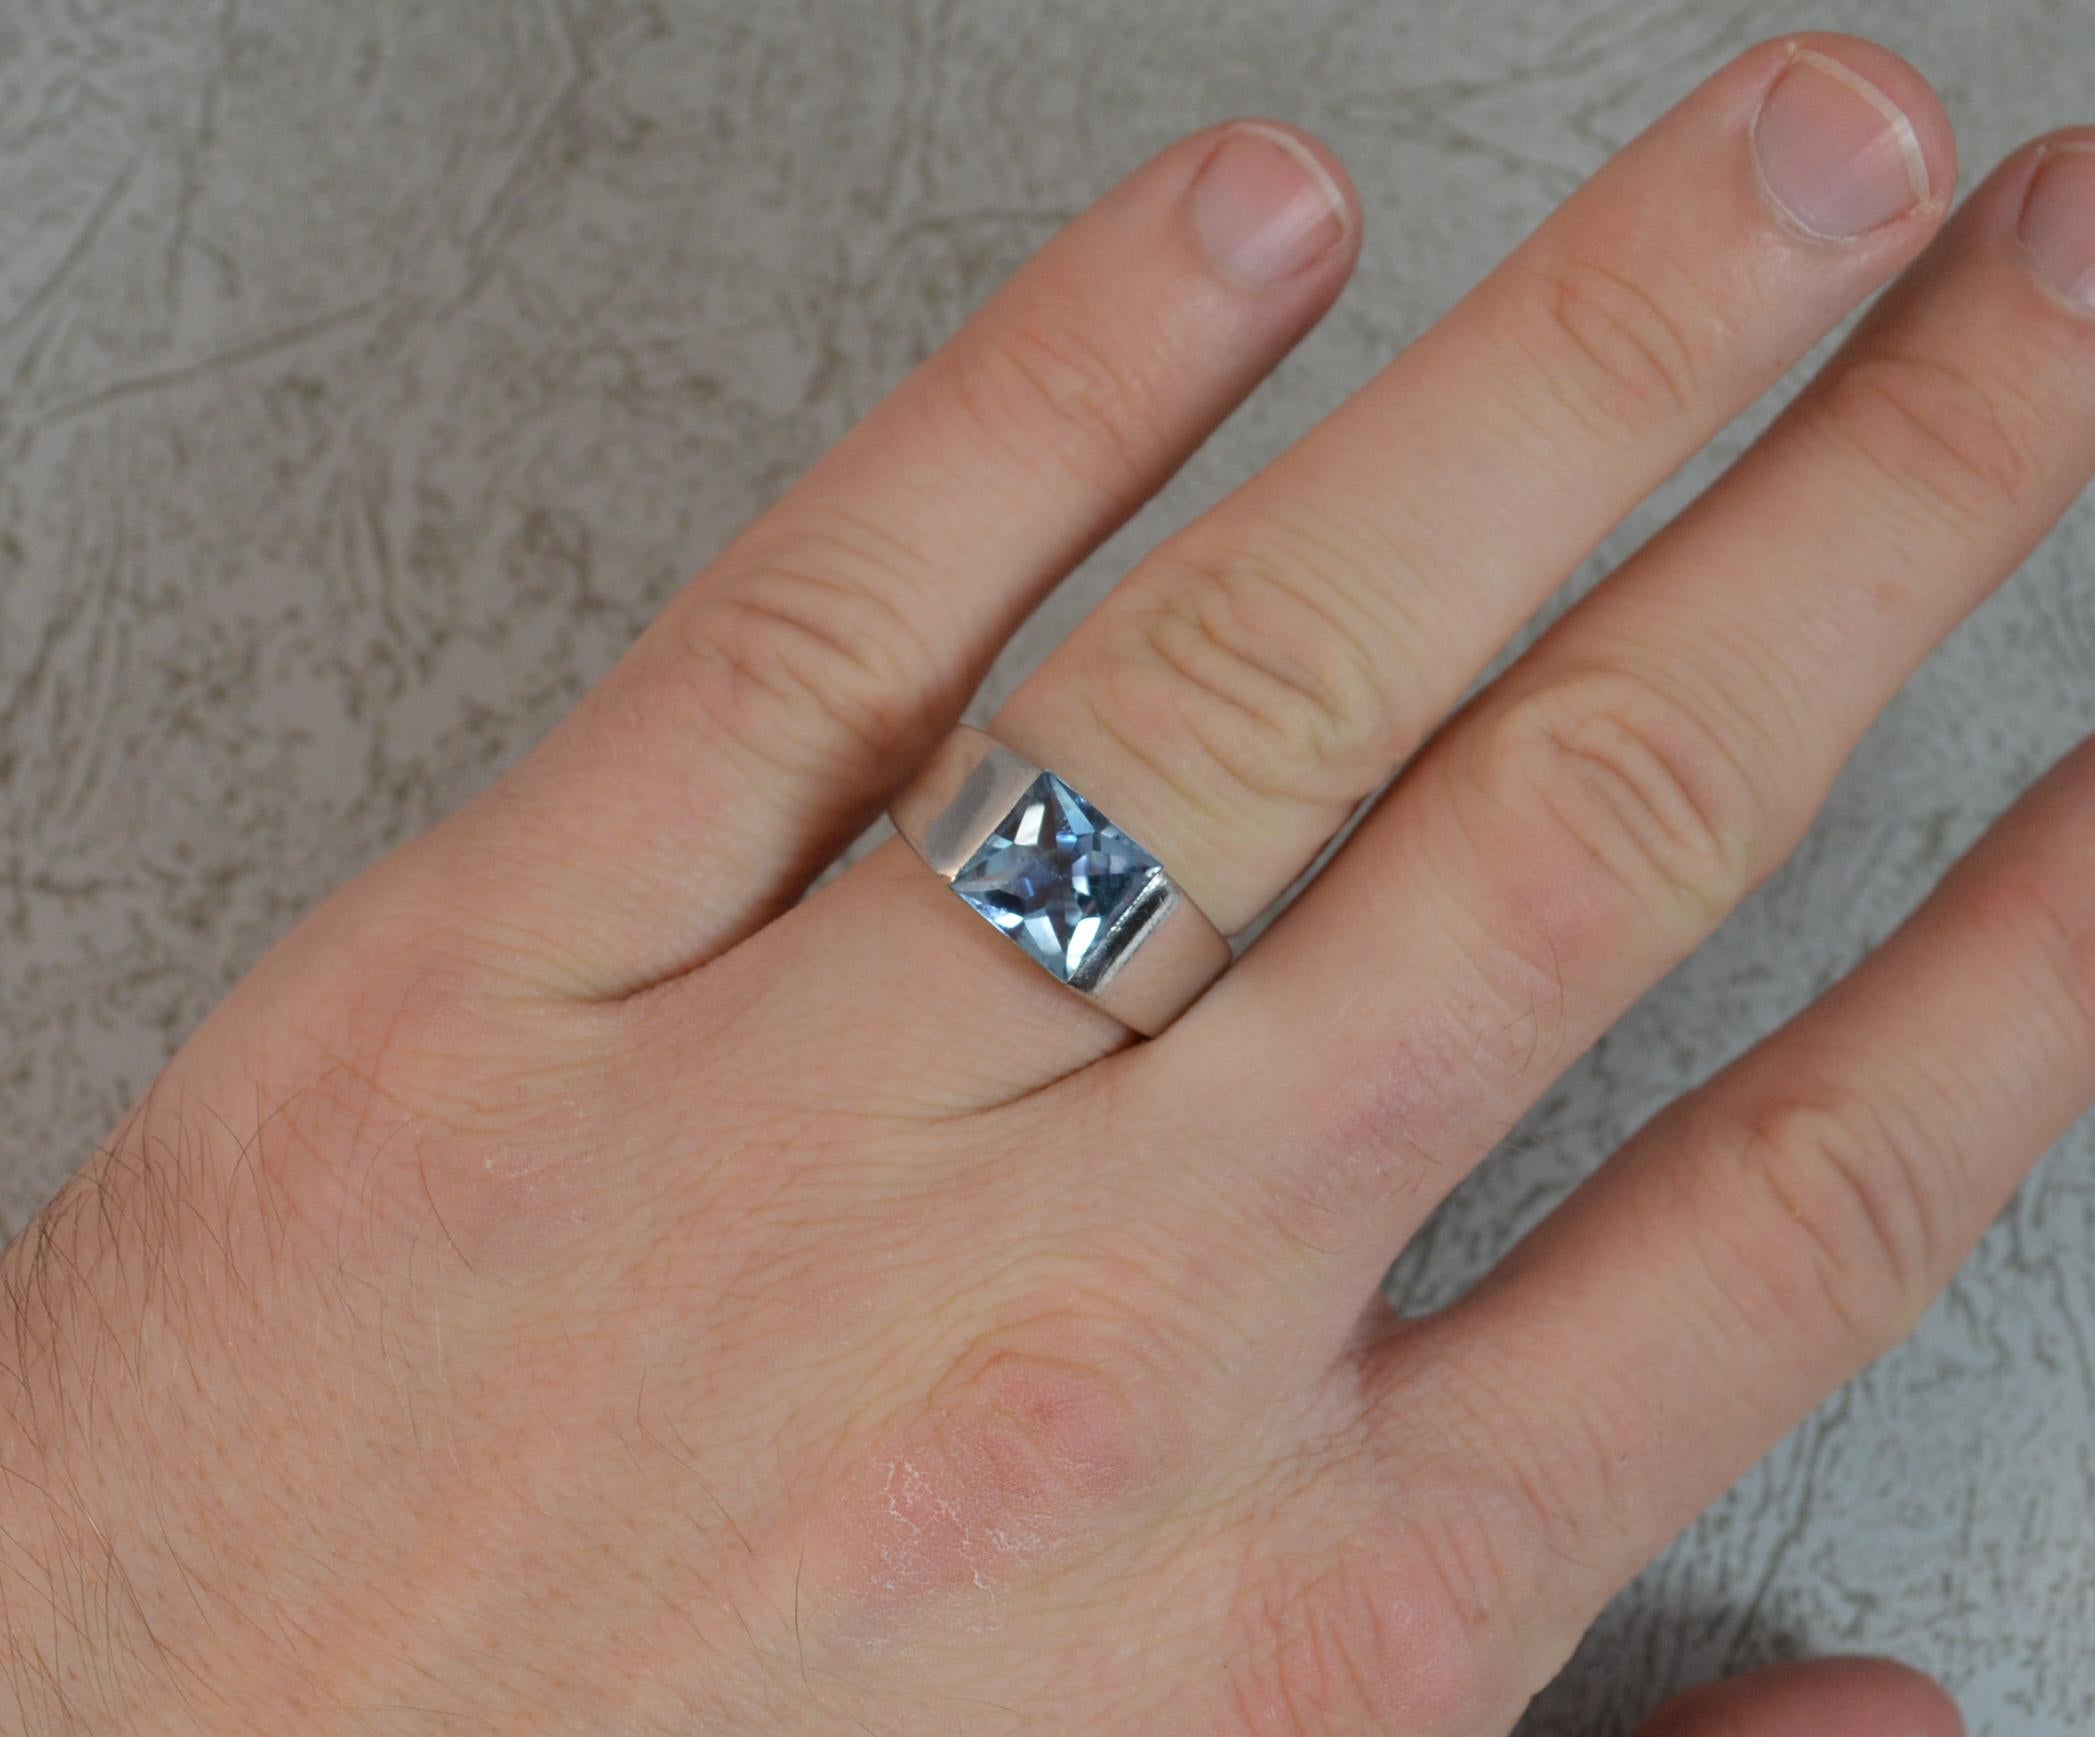 A Cartier designer Tank ring.
18 carat white gold example.
8mm square cabochon blue topaz to centre.

CONDITION ; Very good. Crisp design. Clear hallmarks. Light wear only. Please view photographs.

WEIGHT ; 12.6 grams
SIZE ; L 1/2 UK, 6 US
DATE ;